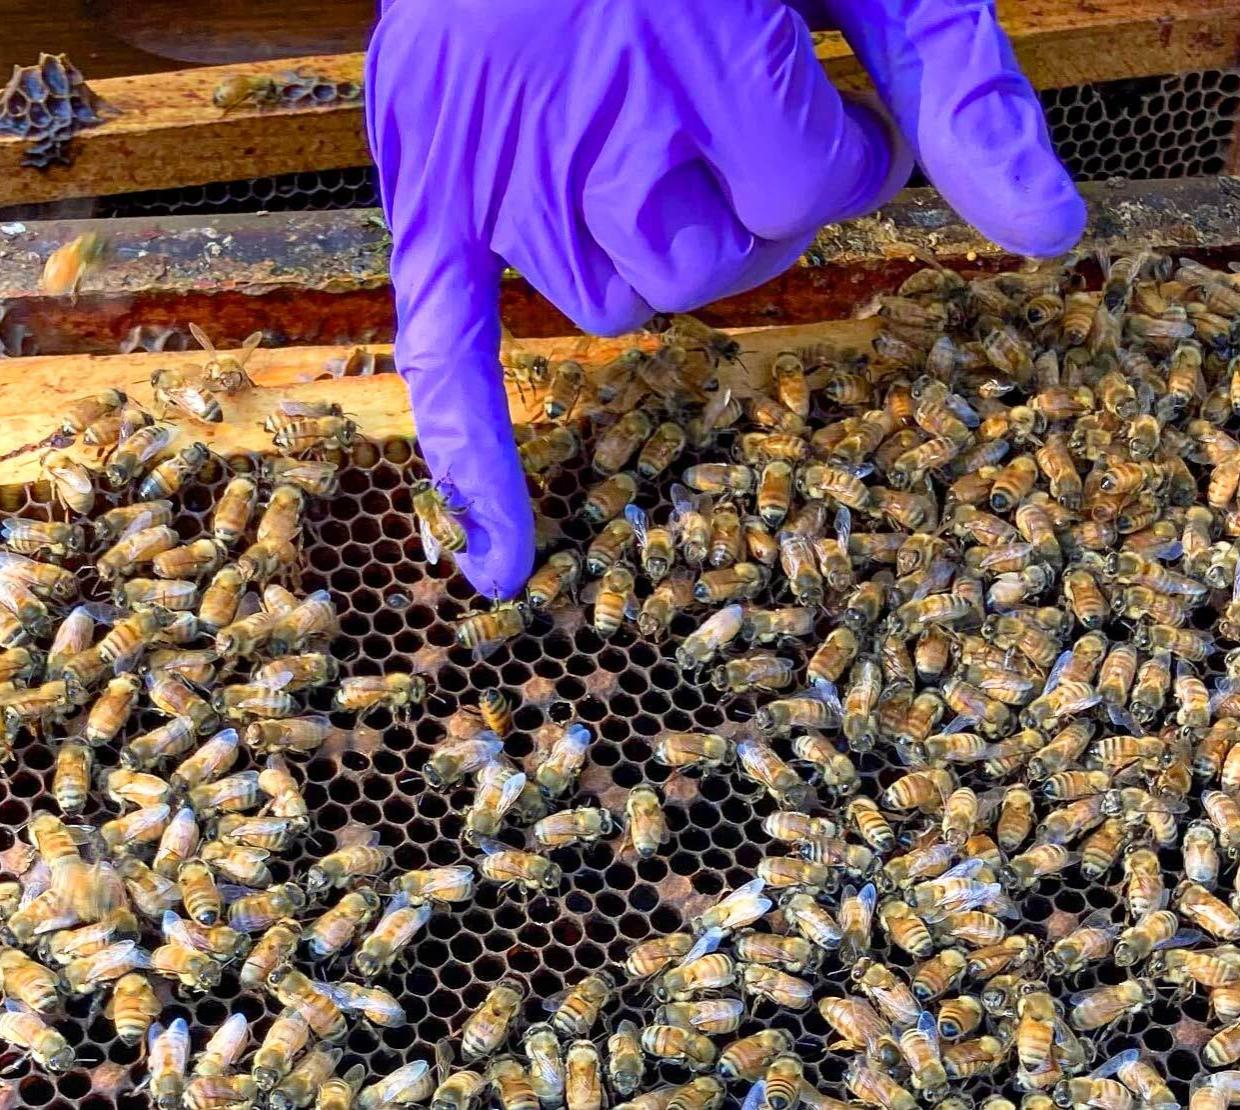 A finger in a blue glove points to honey bees in a hive.